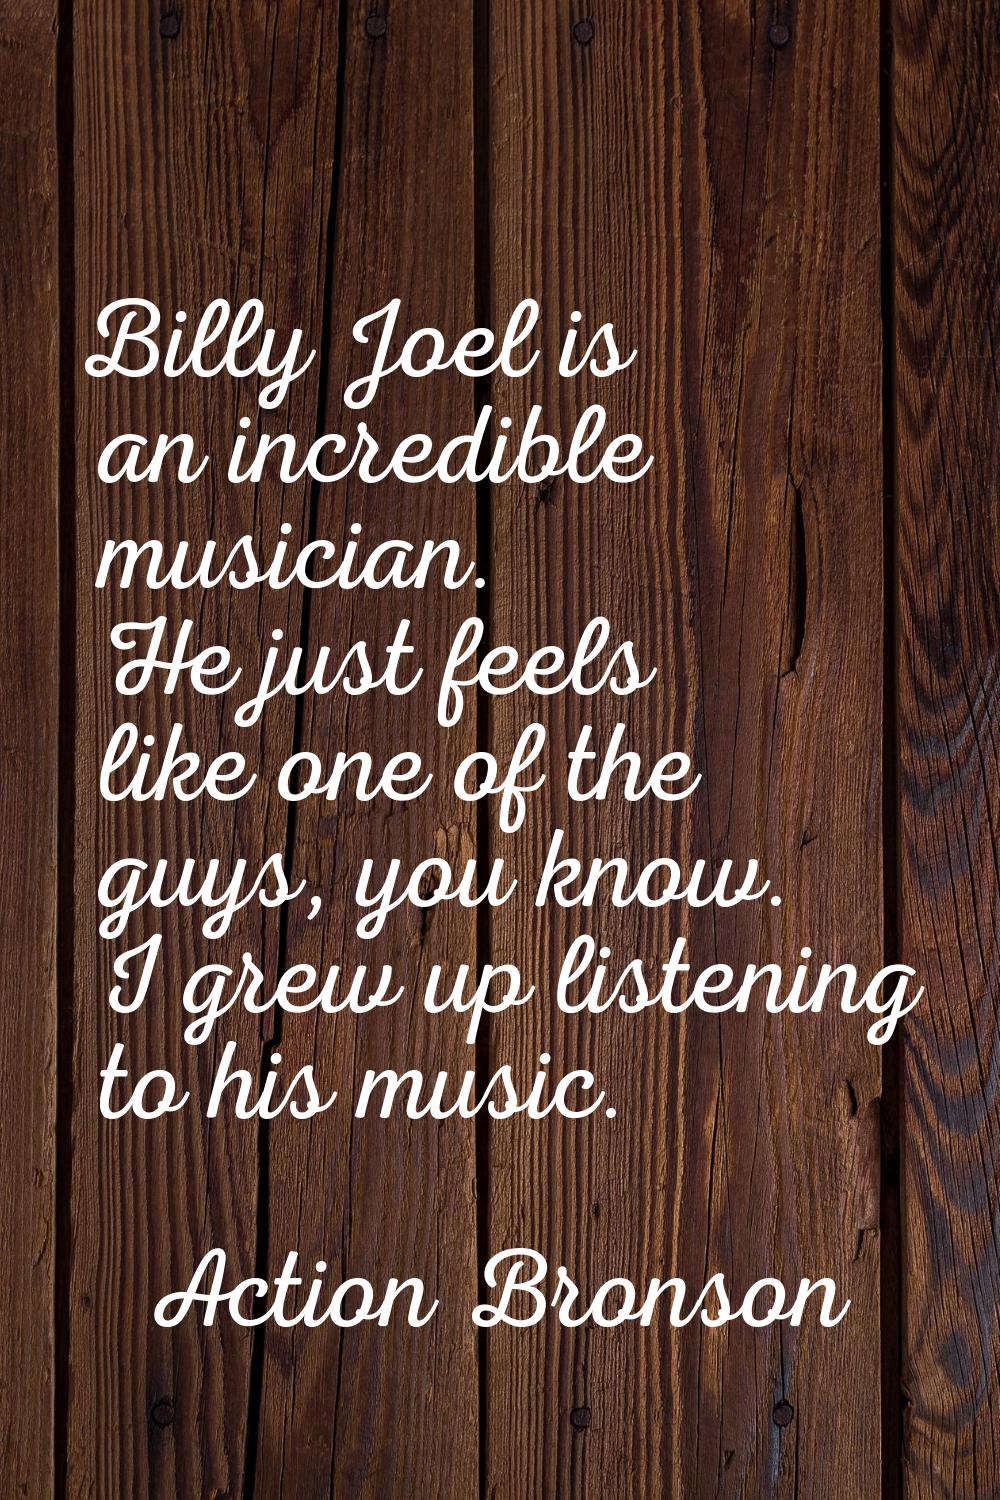 Billy Joel is an incredible musician. He just feels like one of the guys, you know. I grew up liste